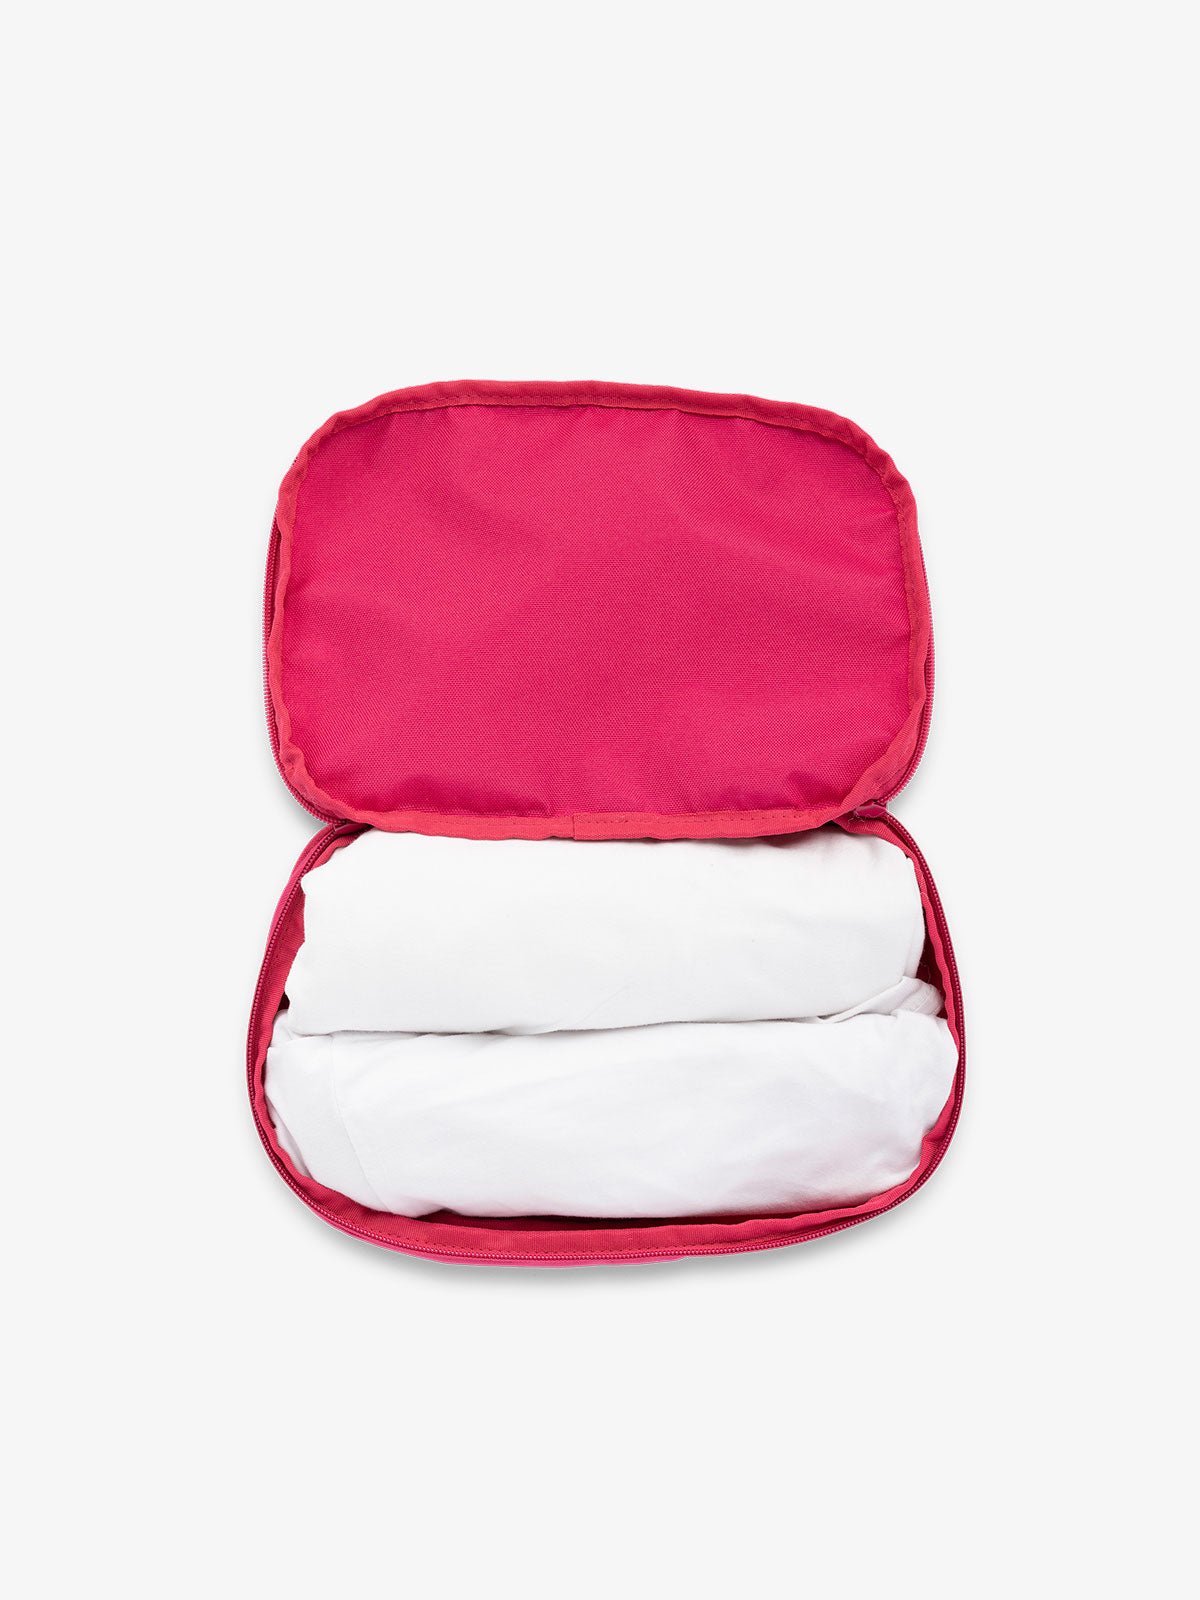 CALPAK small packing cubes for travel made with durable material in dragonfruit